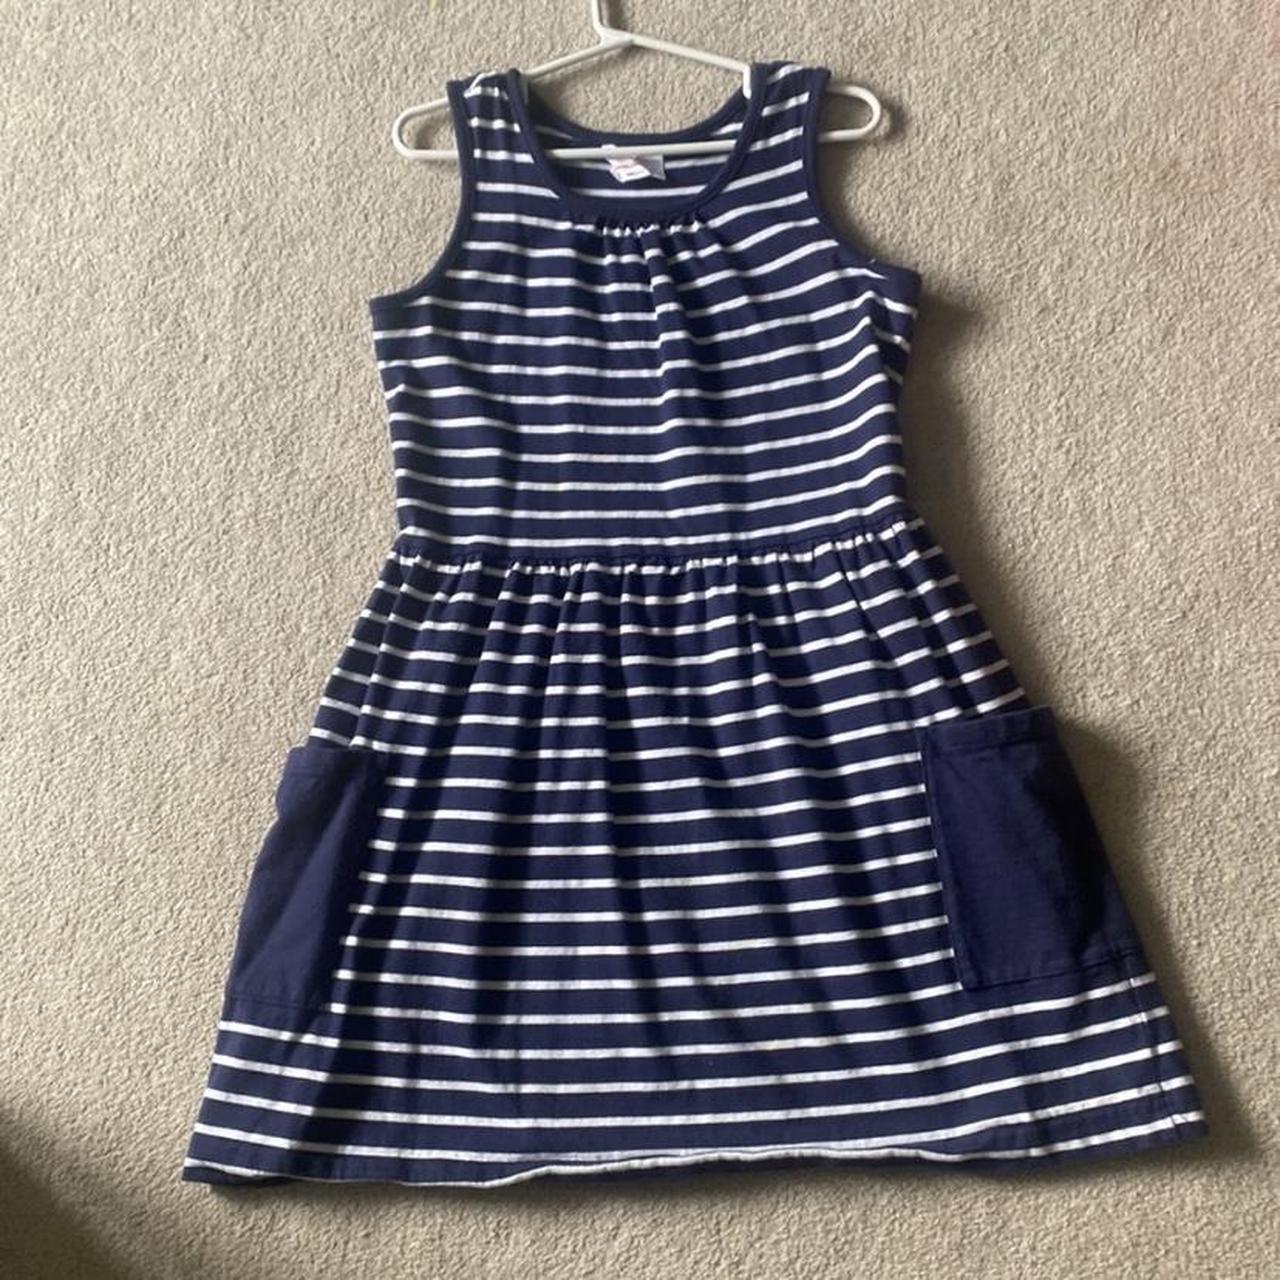 Hanna Andersson Navy and White Dress | Depop